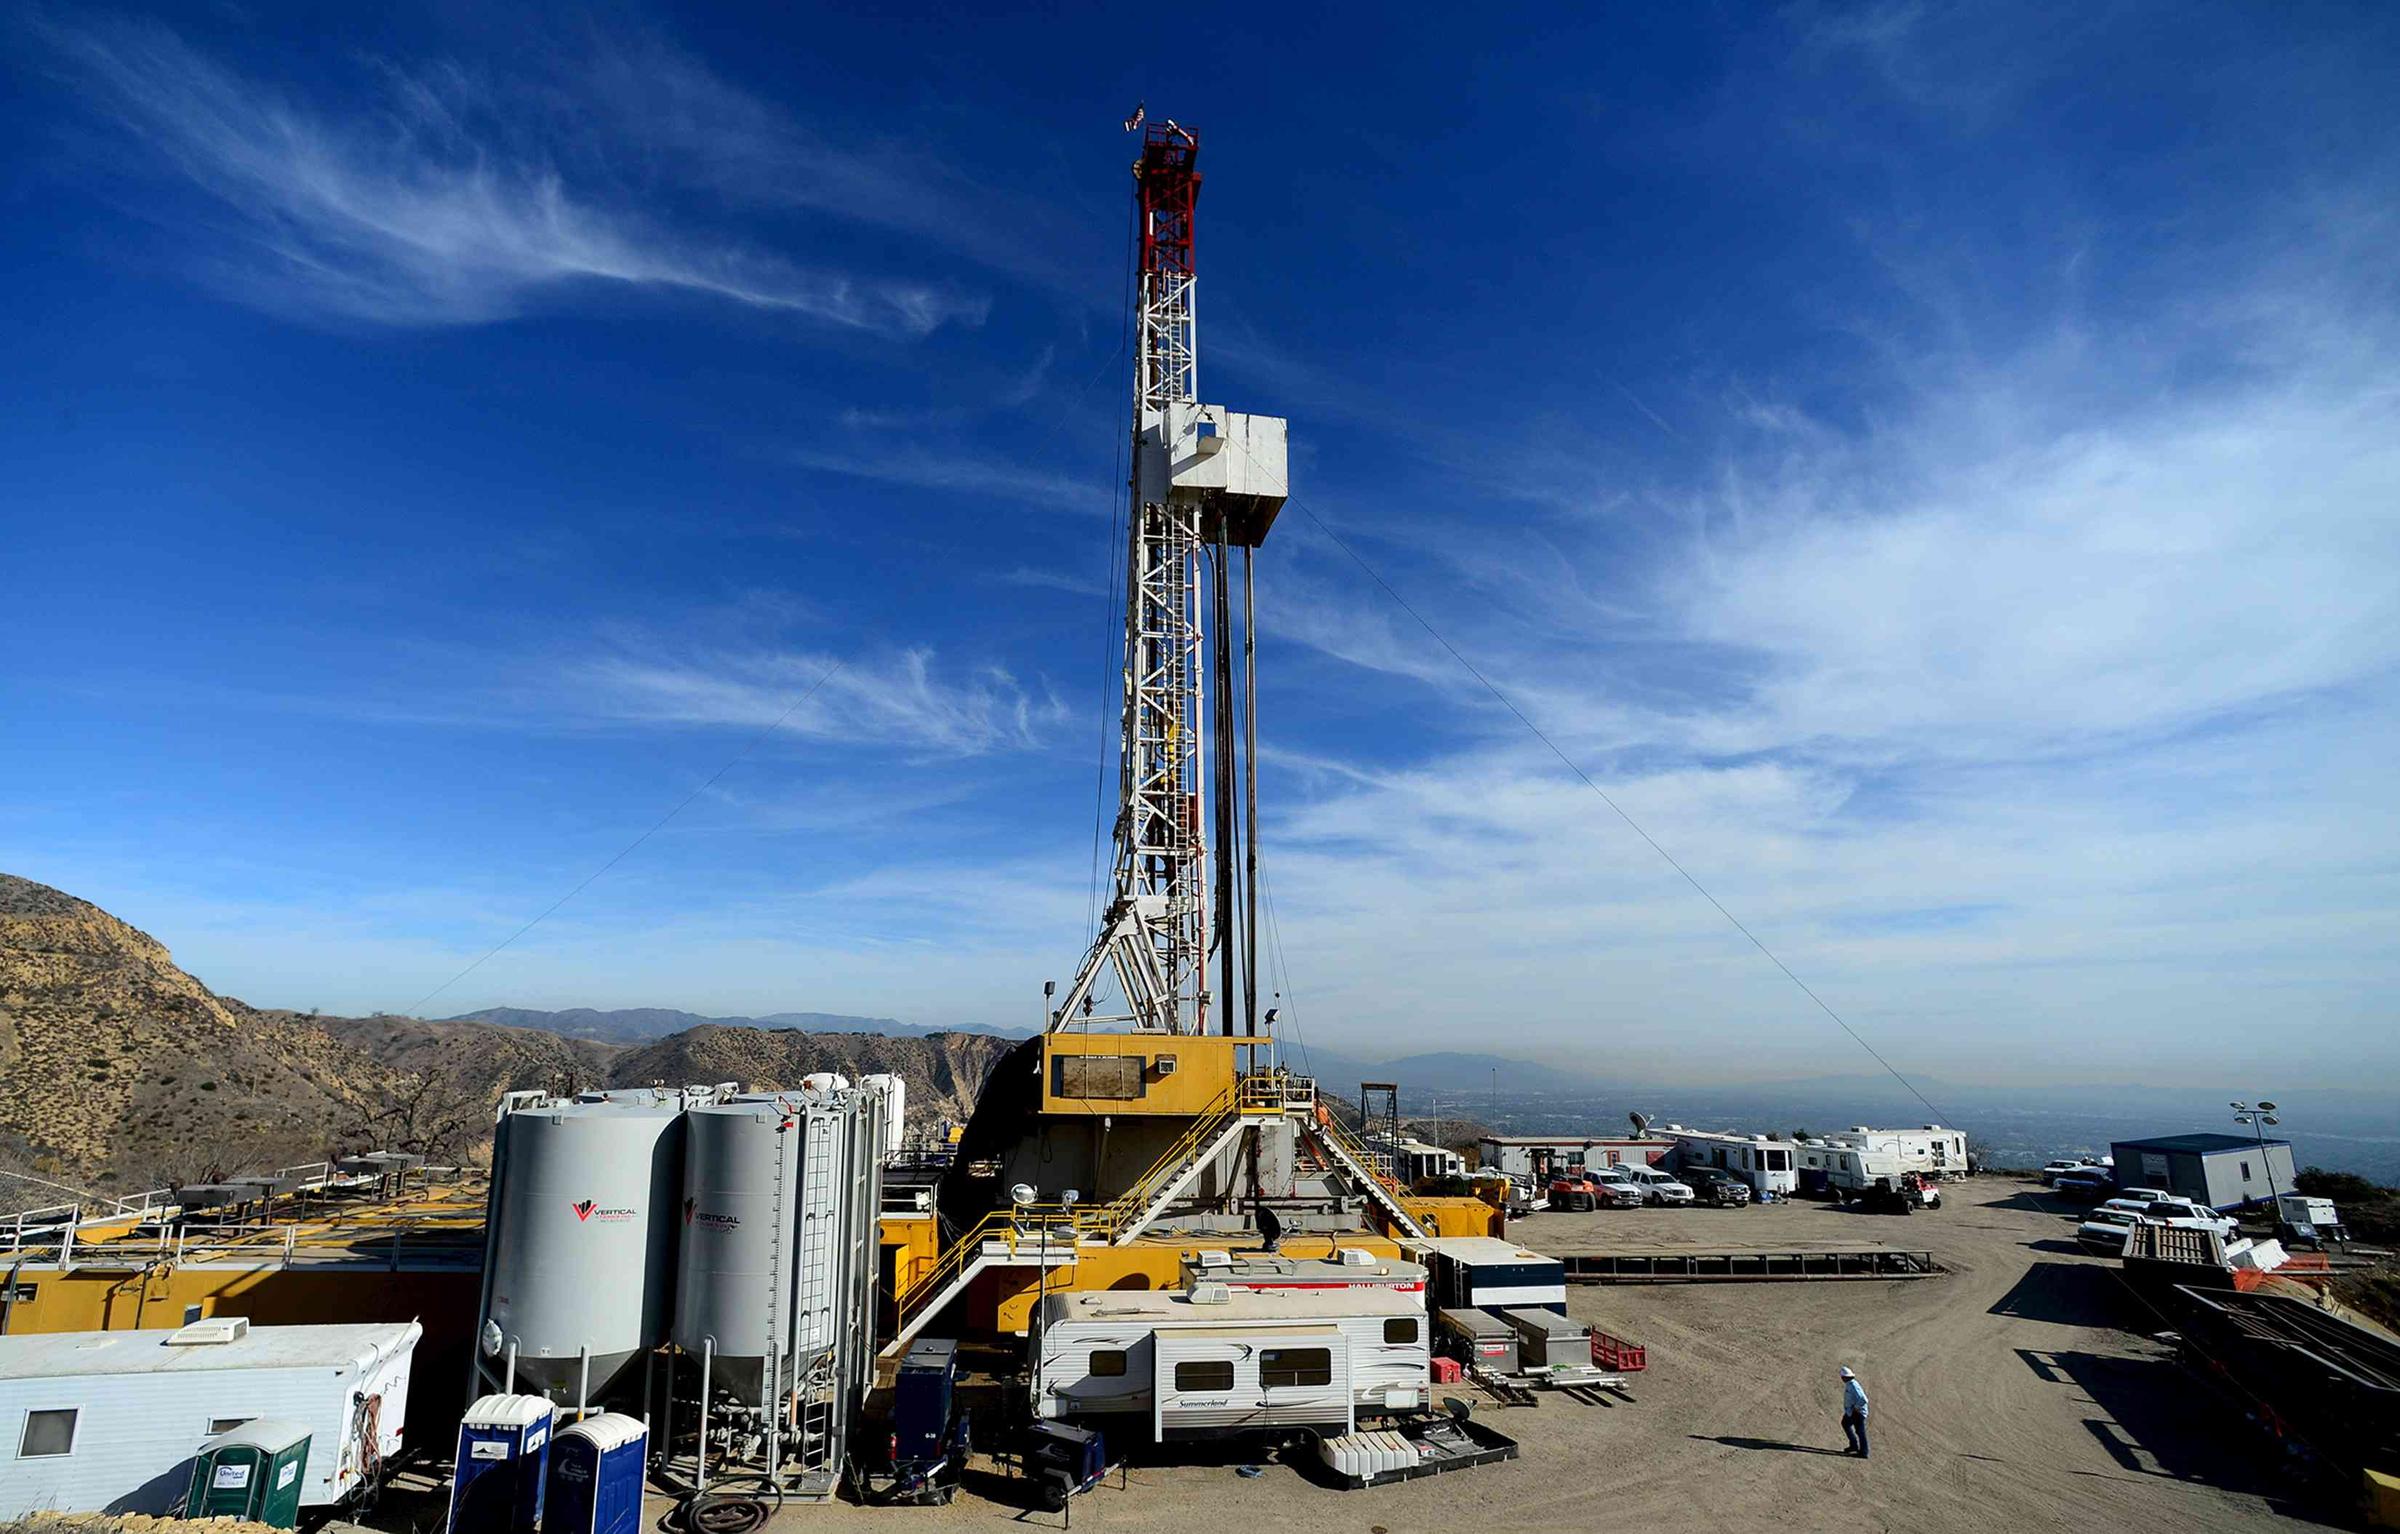 Just how big is the natural gas leak in California? WBFO